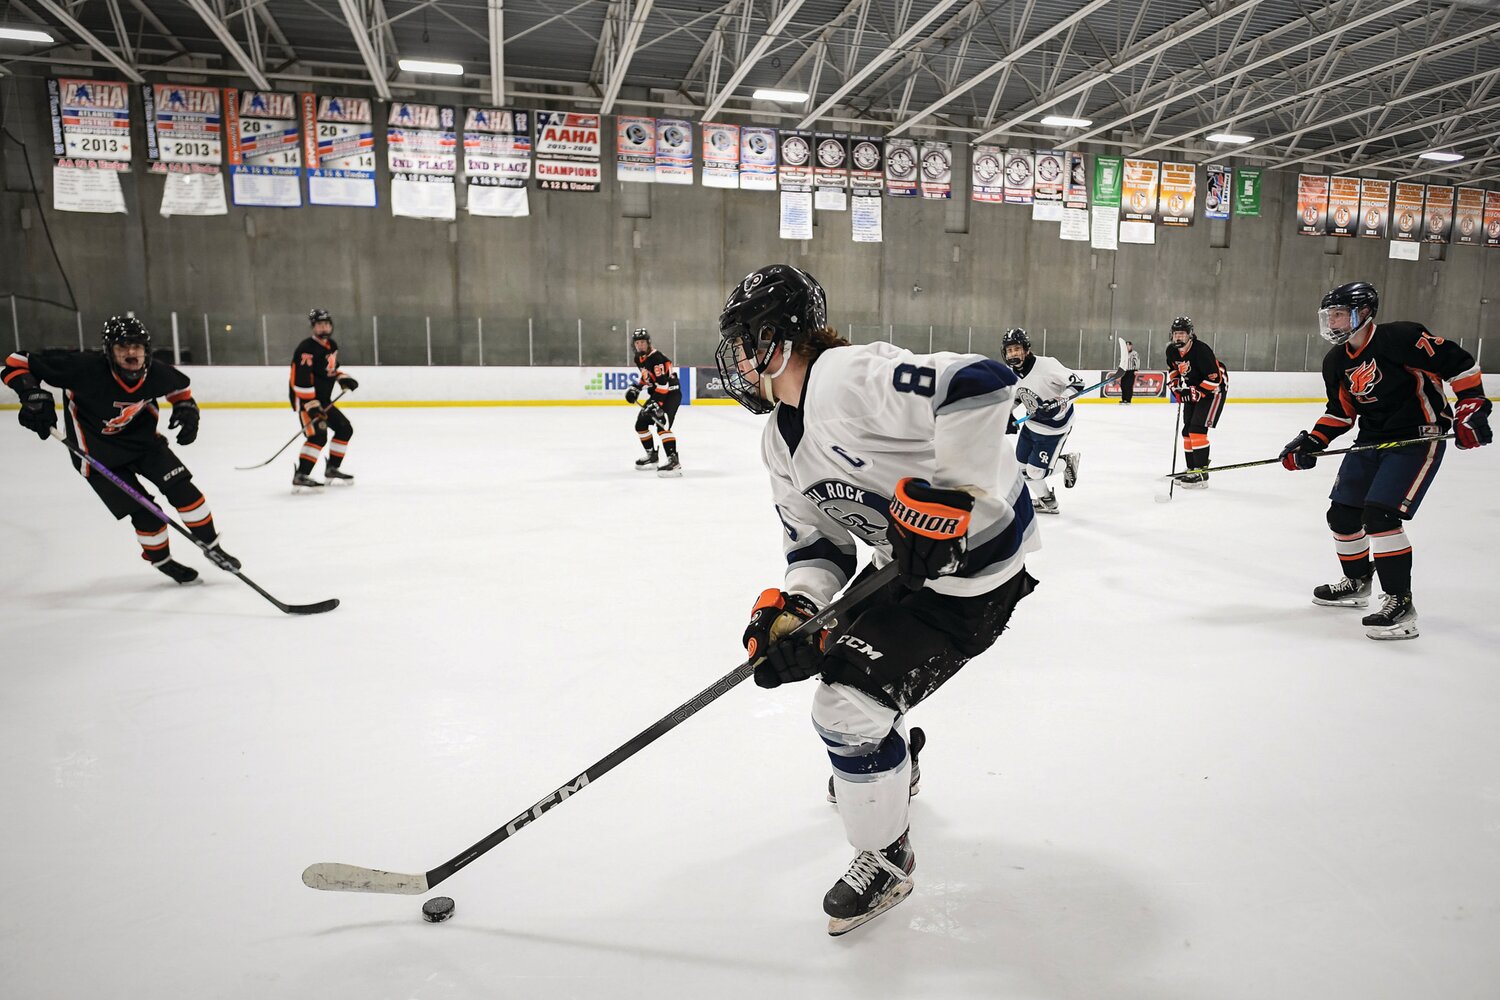 Nicholas Hahn looks for open space in the first period of last Wednesday’s clash with Pennsbury.